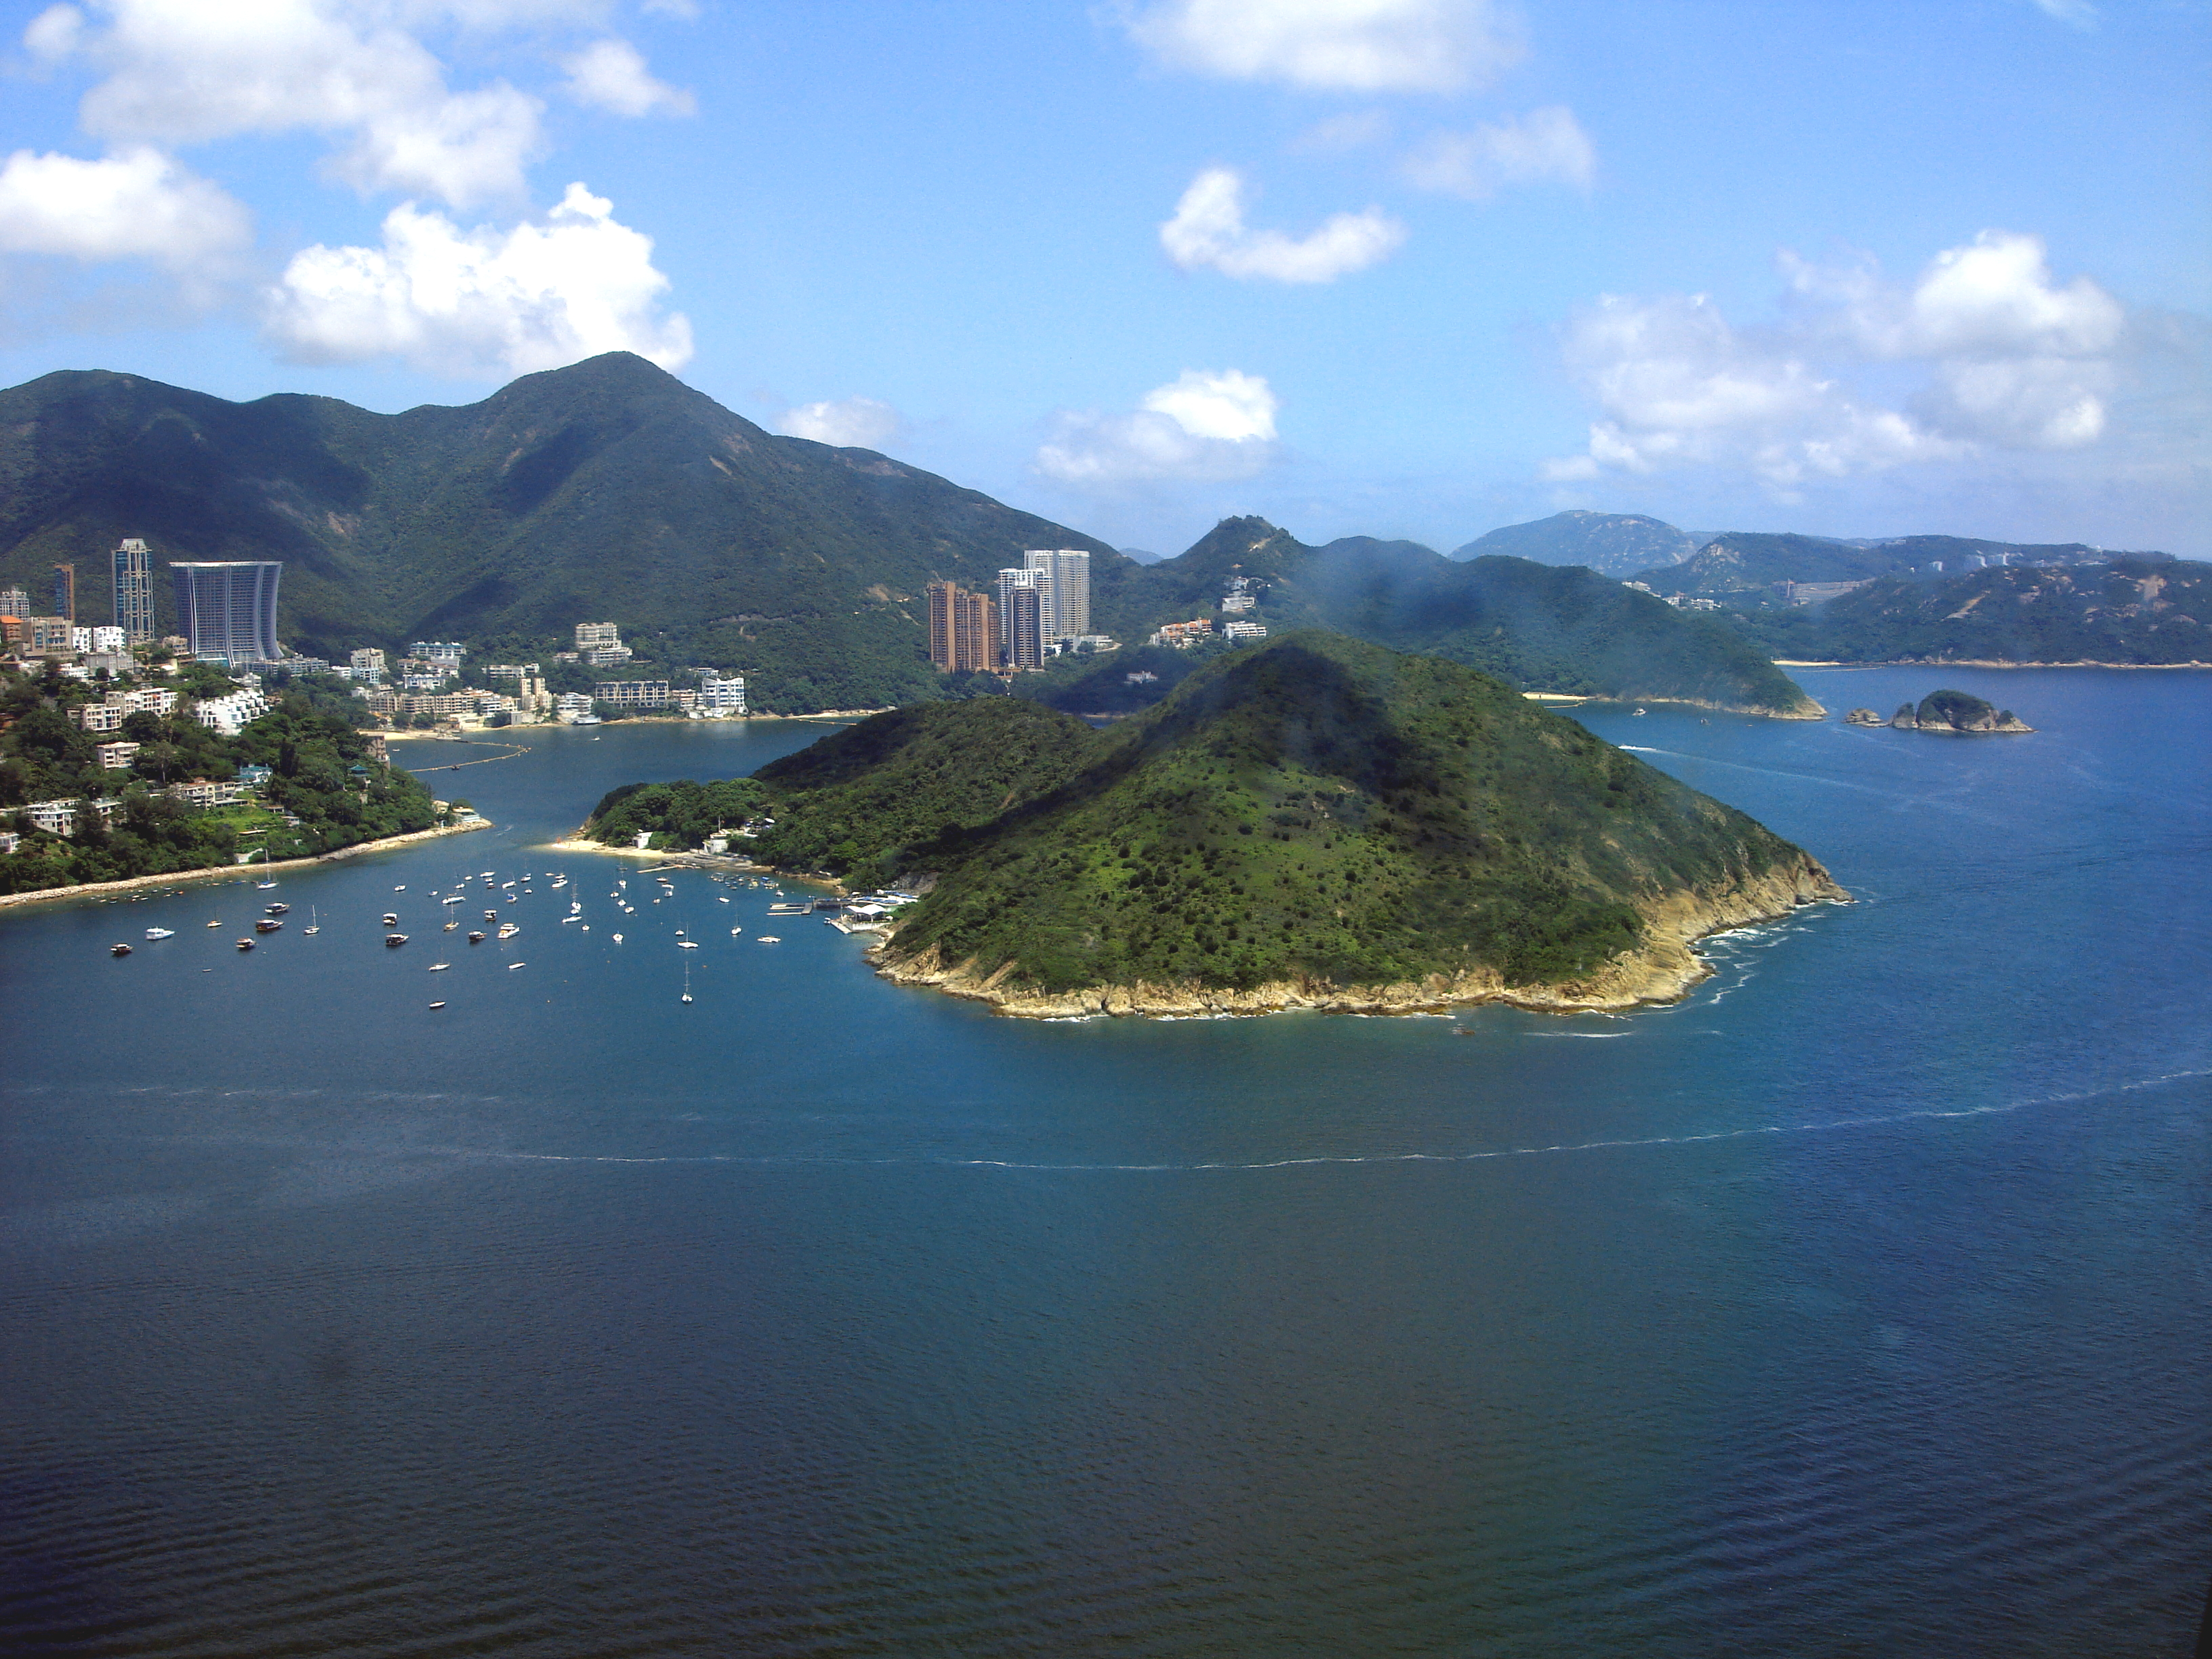 View of Middle Island, off Hong Kong Island (left) between Deep Water Bay and Repulse Bay (background, left). Viewed from the Ocean Park cable car ride. Repulse Bay is in the southern part of Hong Kong Island, located in the Southern District. It is one of the most expensive residential areas in Hong Kong. Photo taken on August 16, 2006.